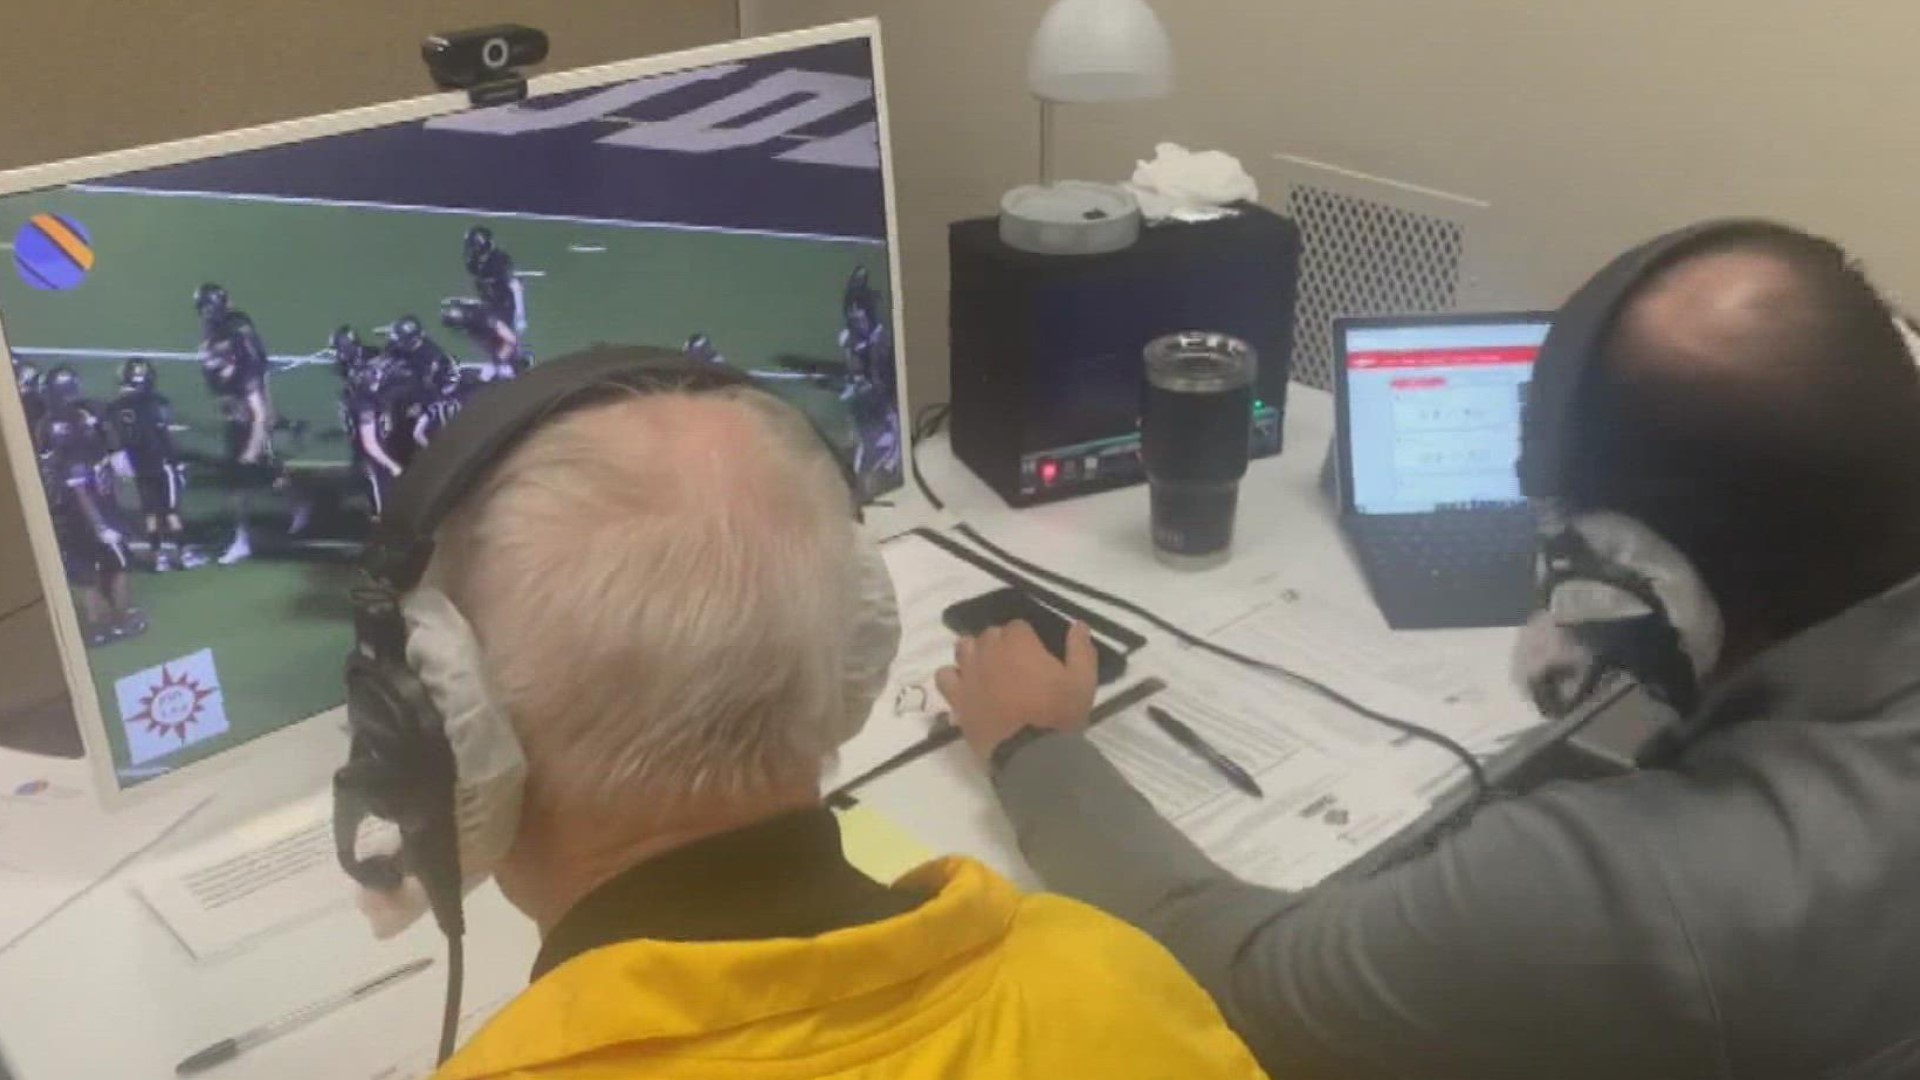 Central Indiana’s largest high school sports webcaster has chosen a rather unique remote location as its broadcasting headquarters.